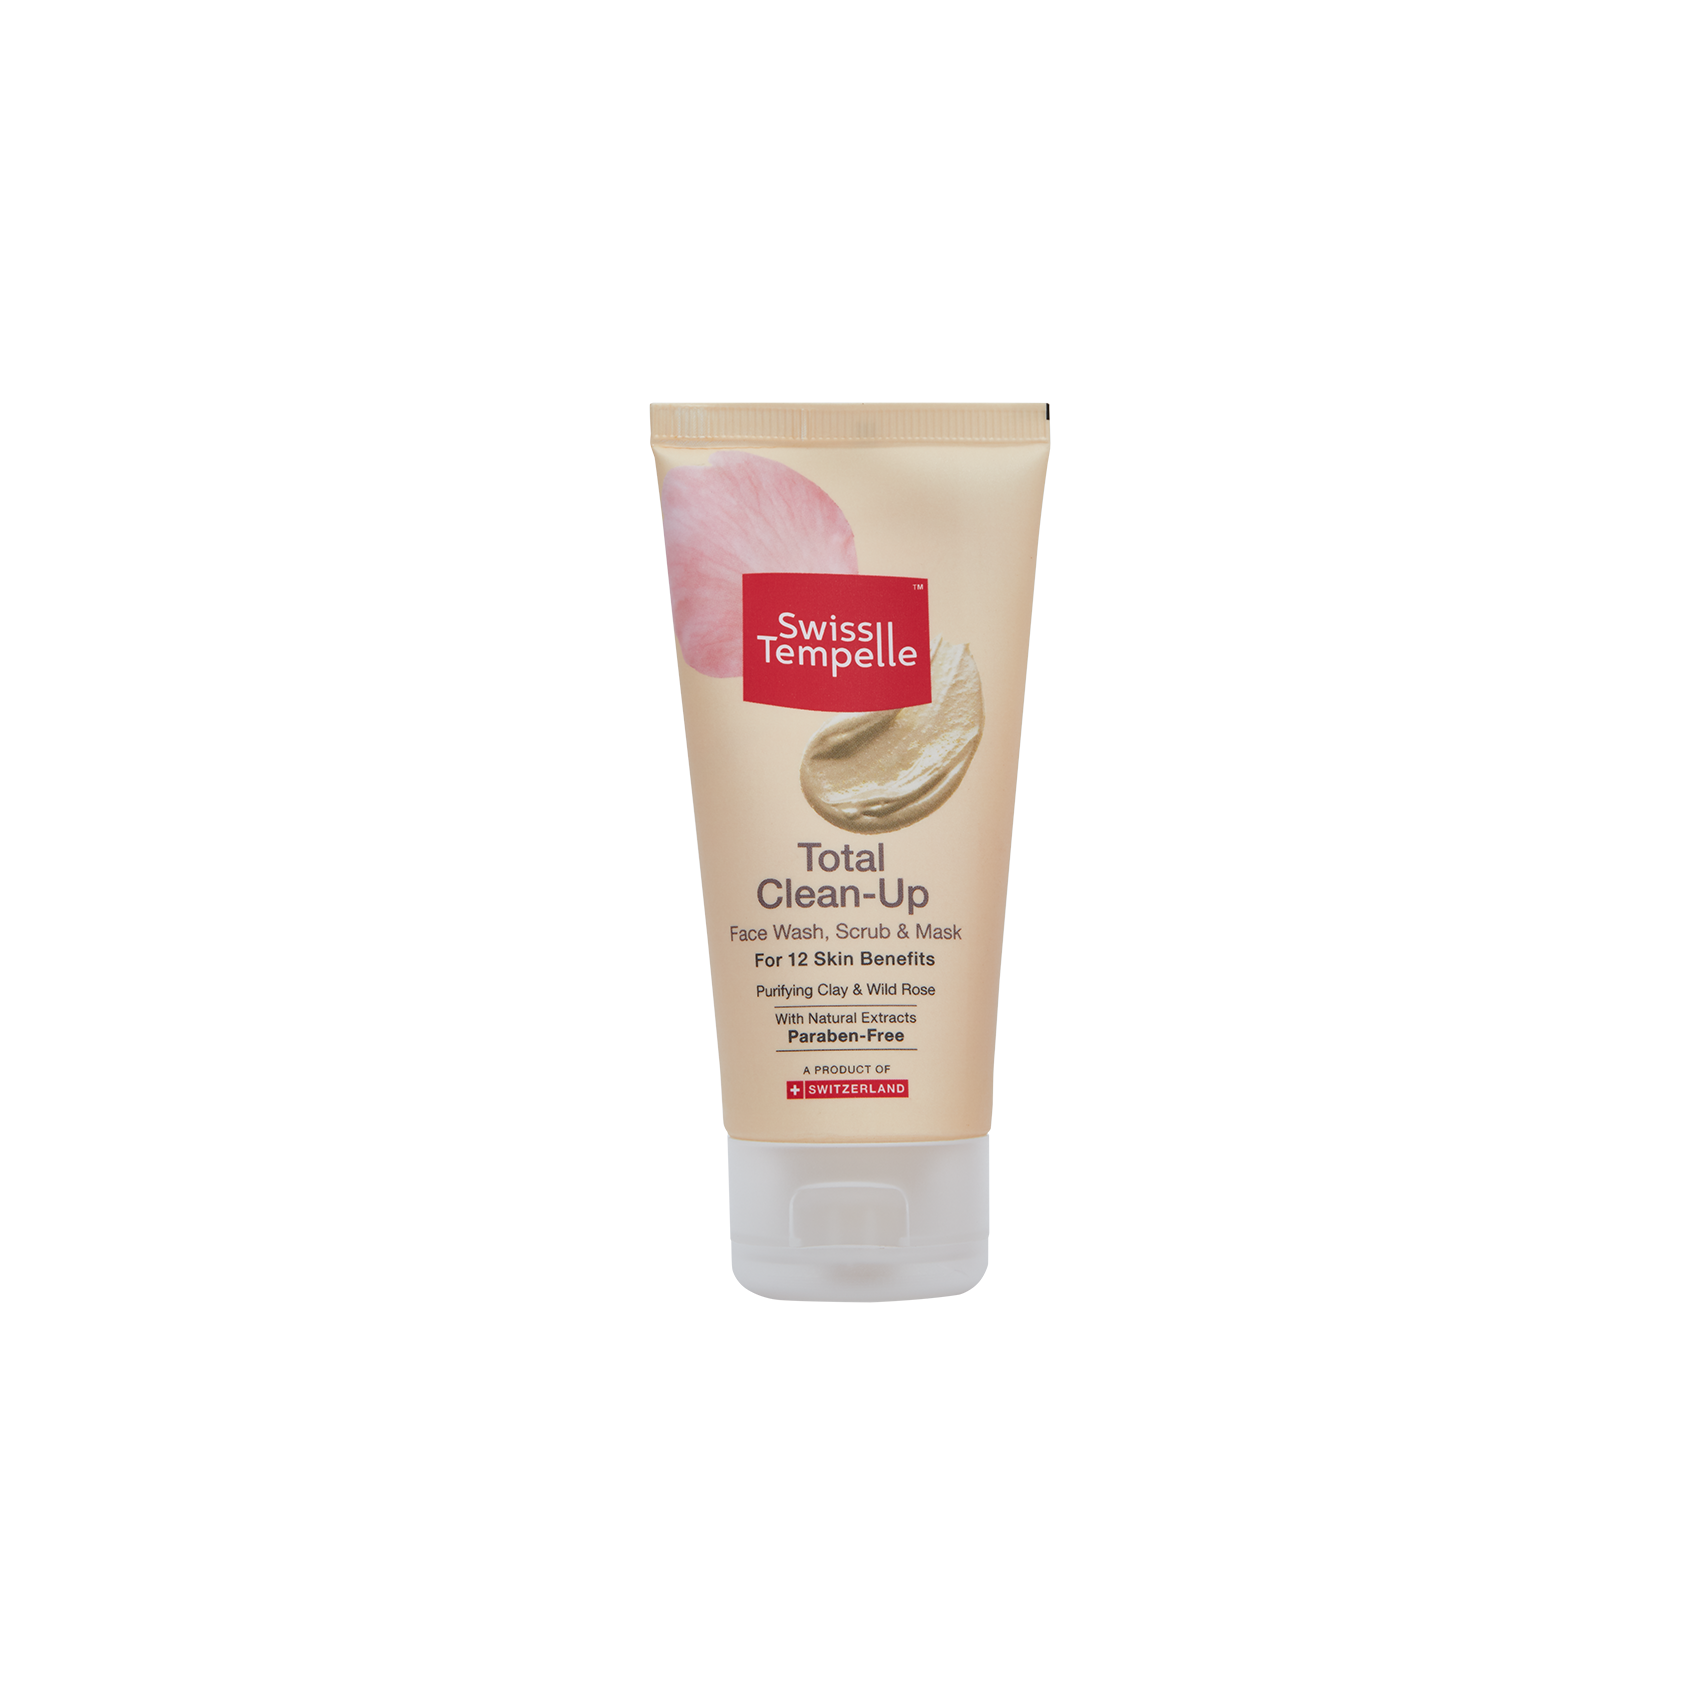 Swiss Tempelle Total Clean-Up Face Wash, Scrub & Mask